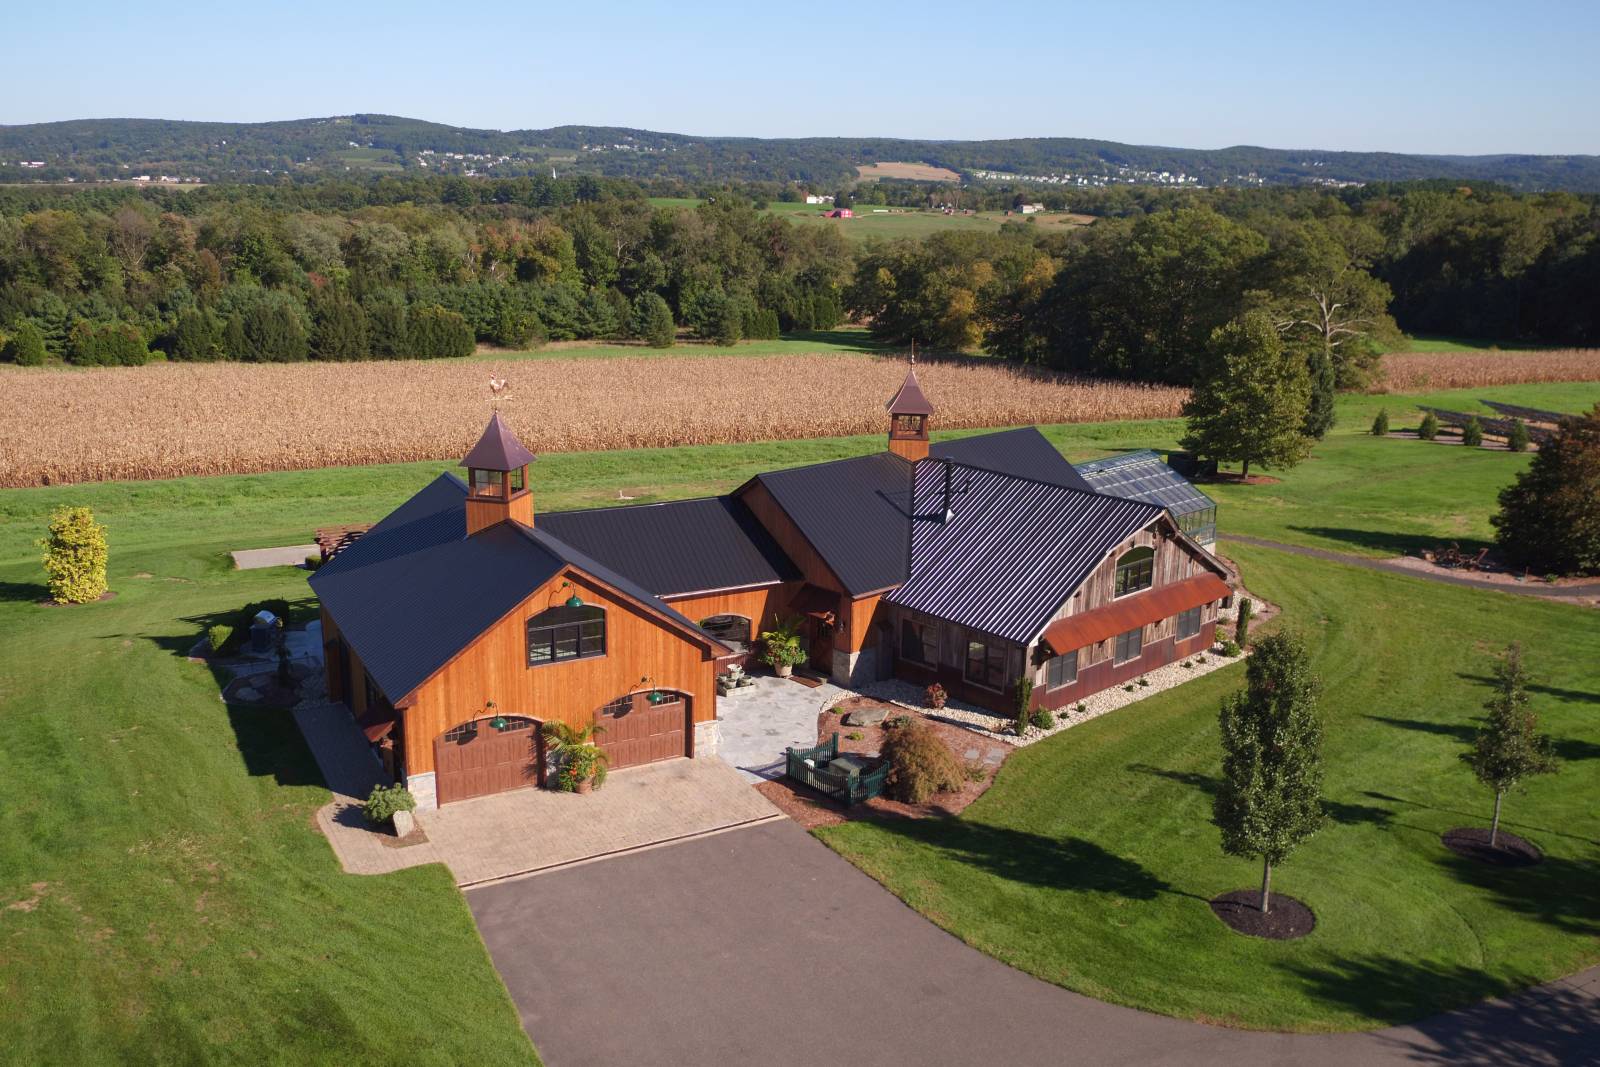 Aerial View of 2500 sq. ft. Party Barn (Ellington CT)